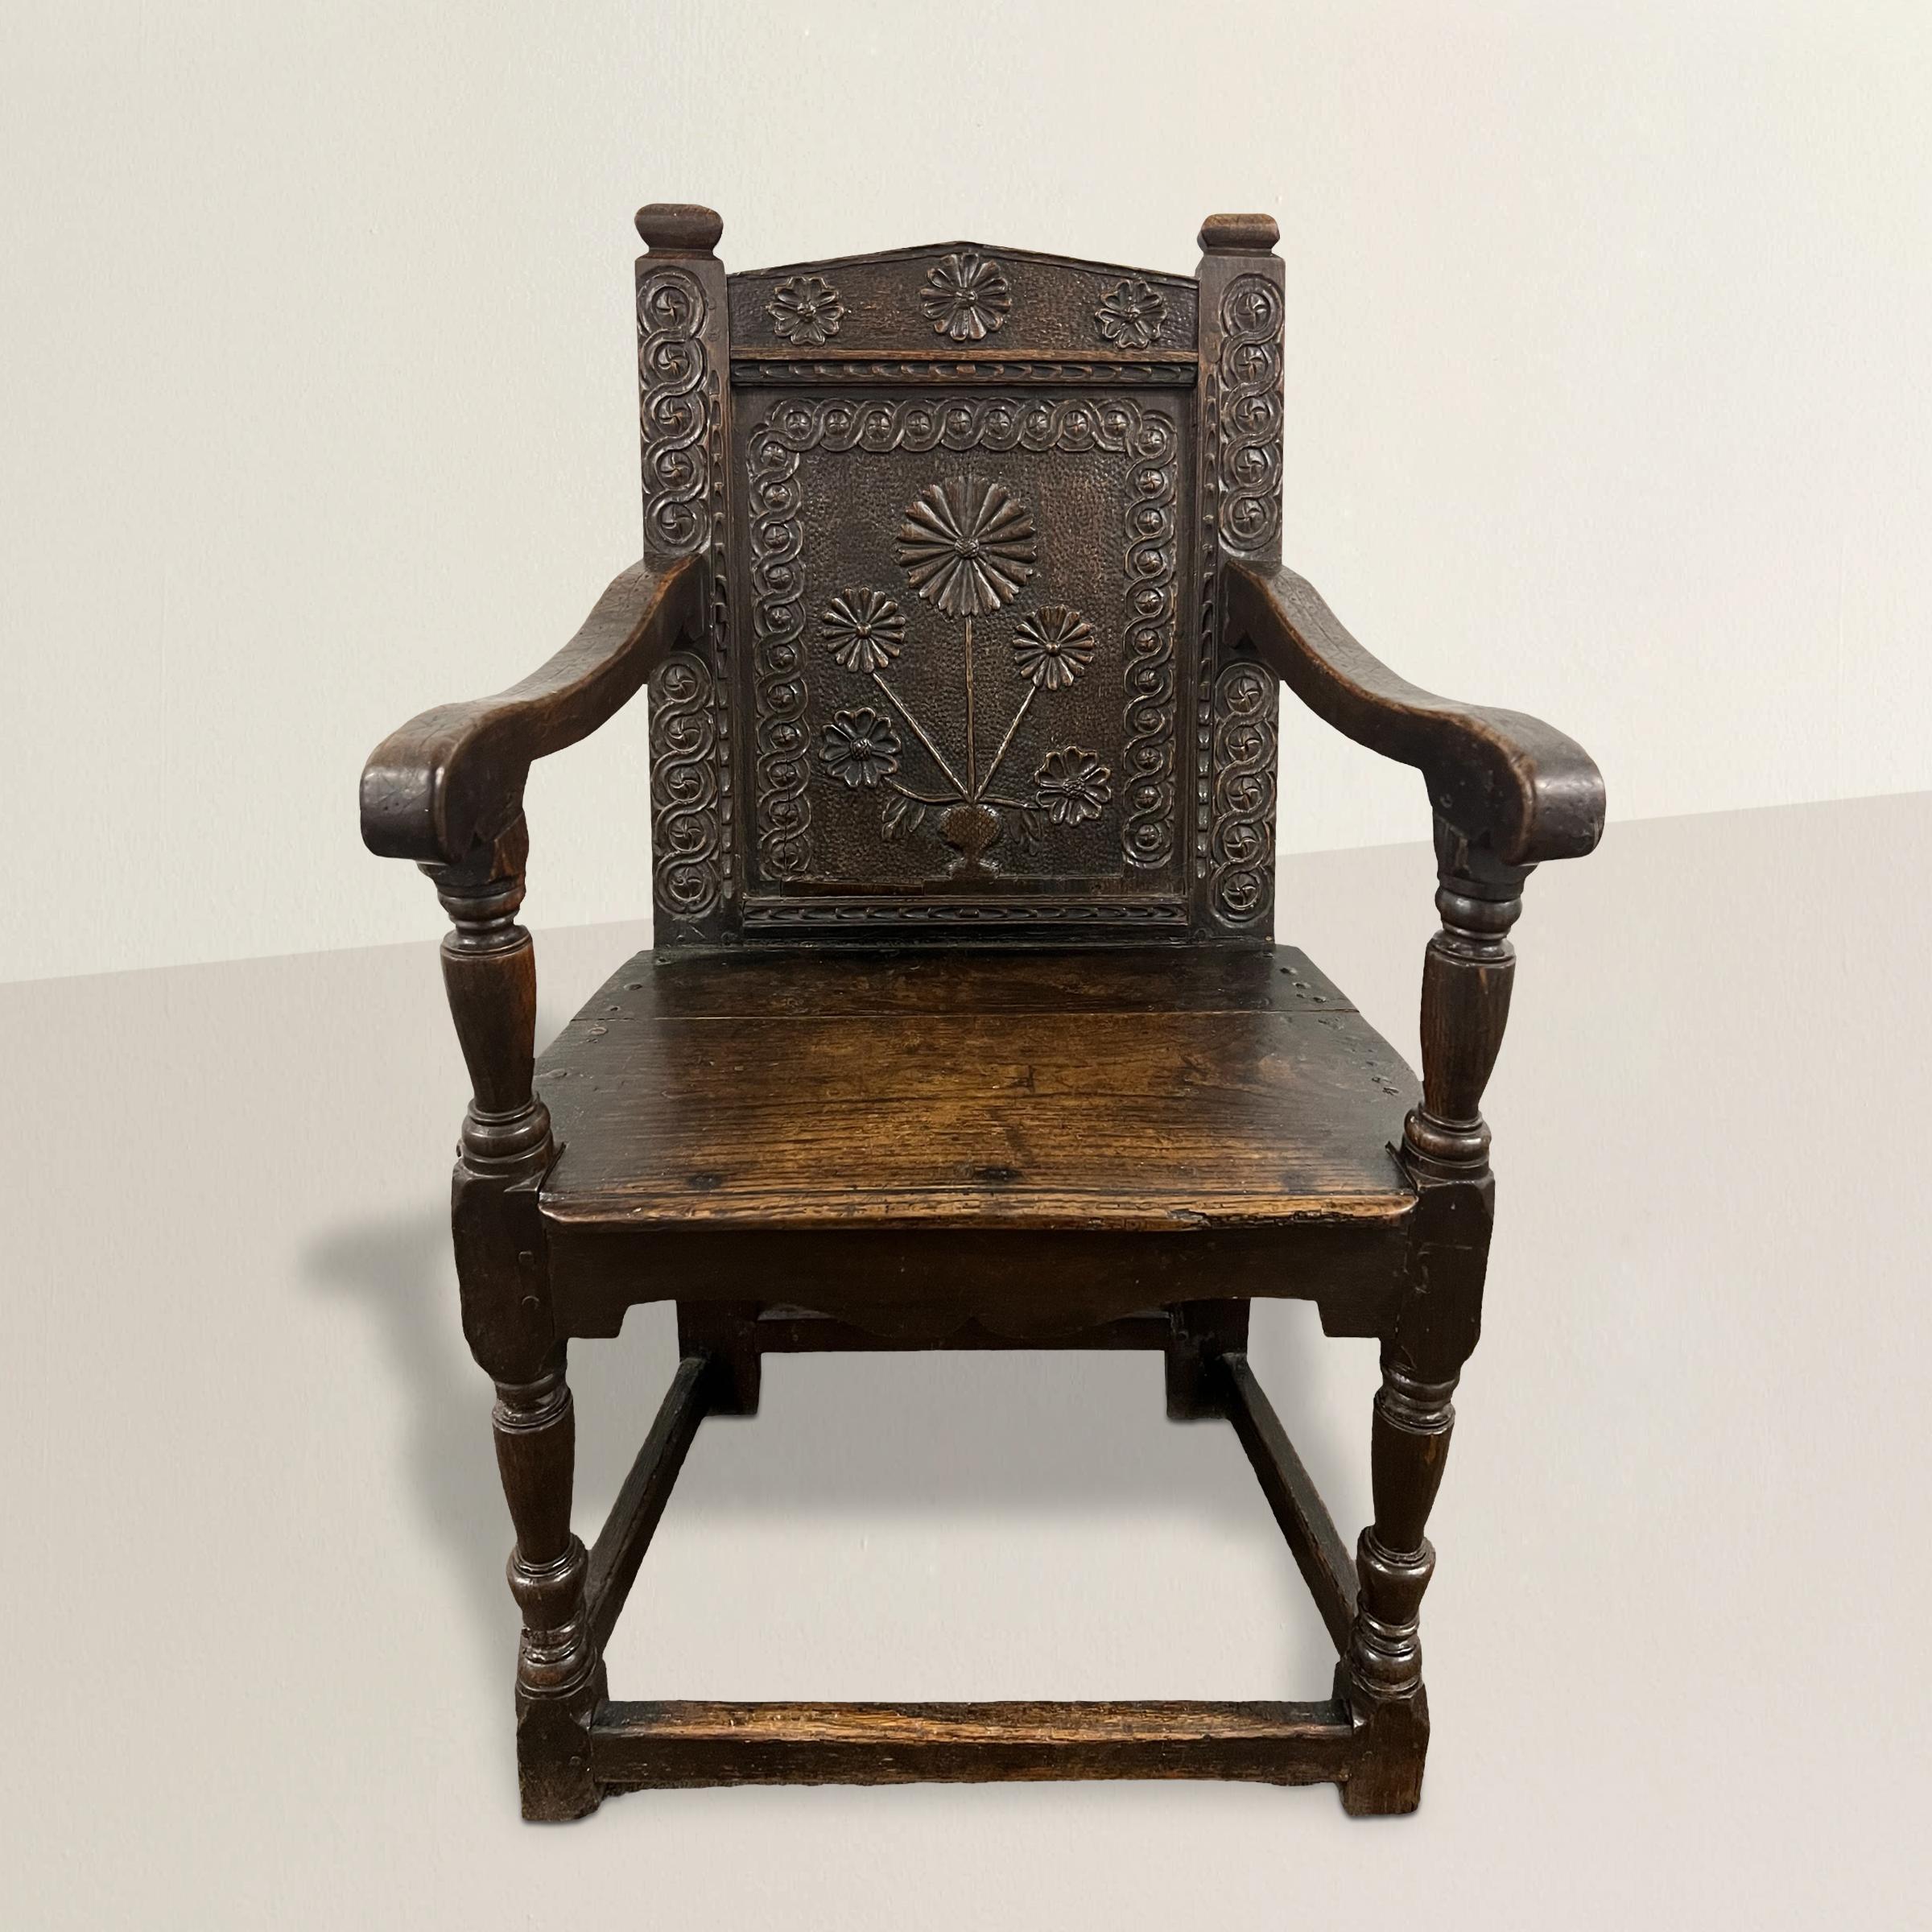 This exquisite 17th-century English oak Wainscot armchair stands as a testament to the era's masterful craftsmanship and artistic expression. The chair's standout feature, a carved daisy plant on the back splat, exemplifies the period's fascination